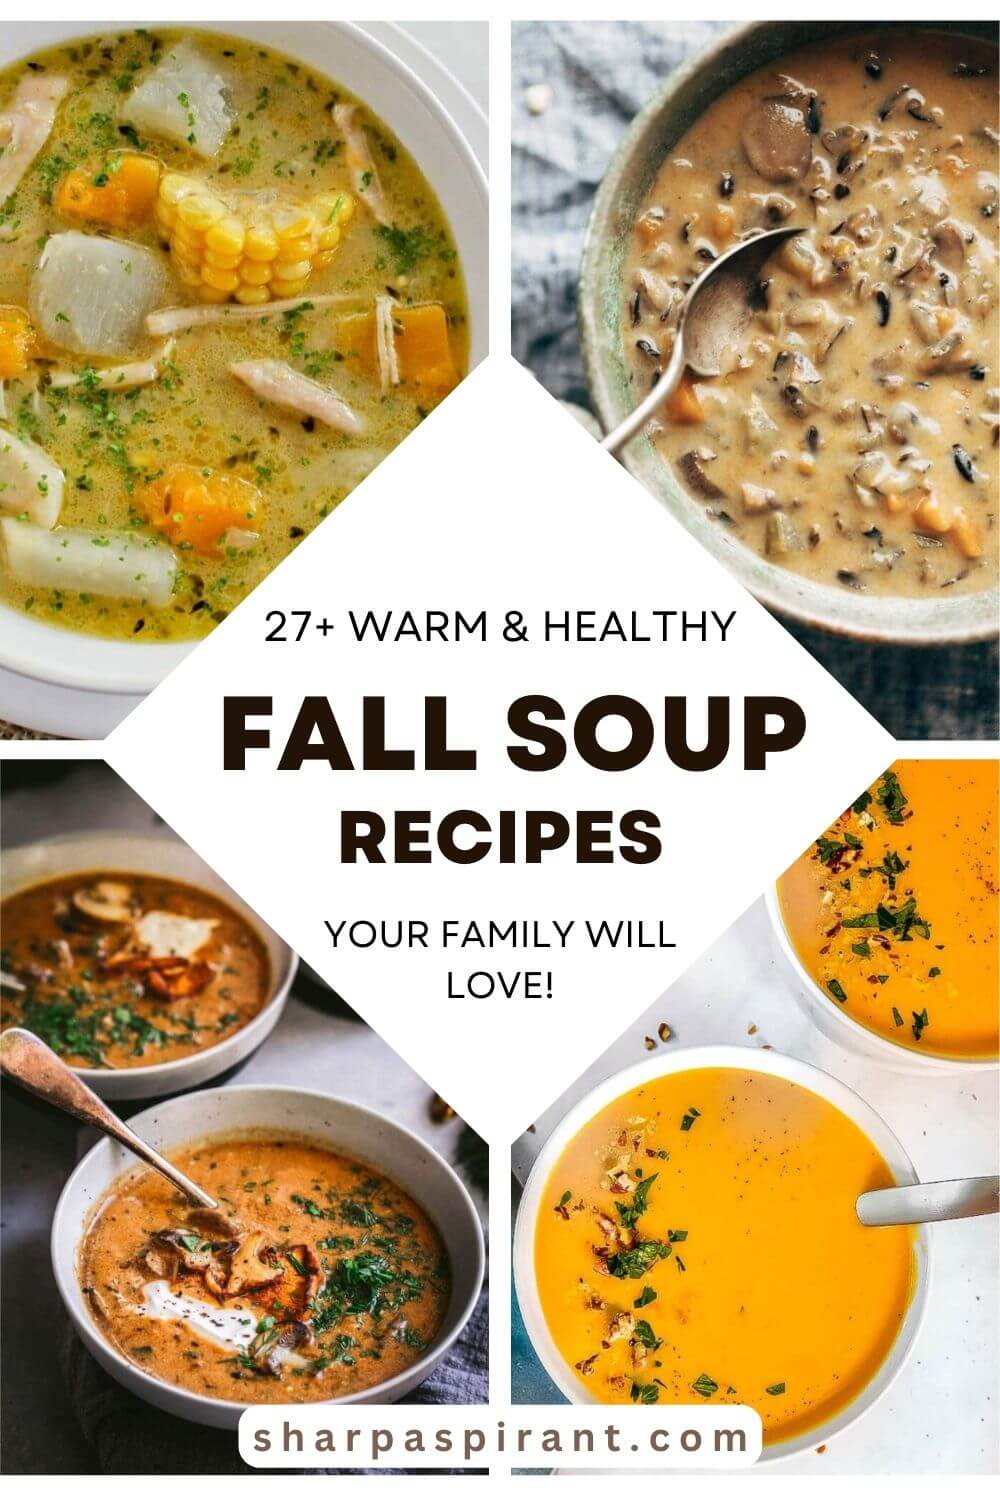 27+ Healthy Fall Soup Recipes You Must Try! - SHARP ASPIRANT